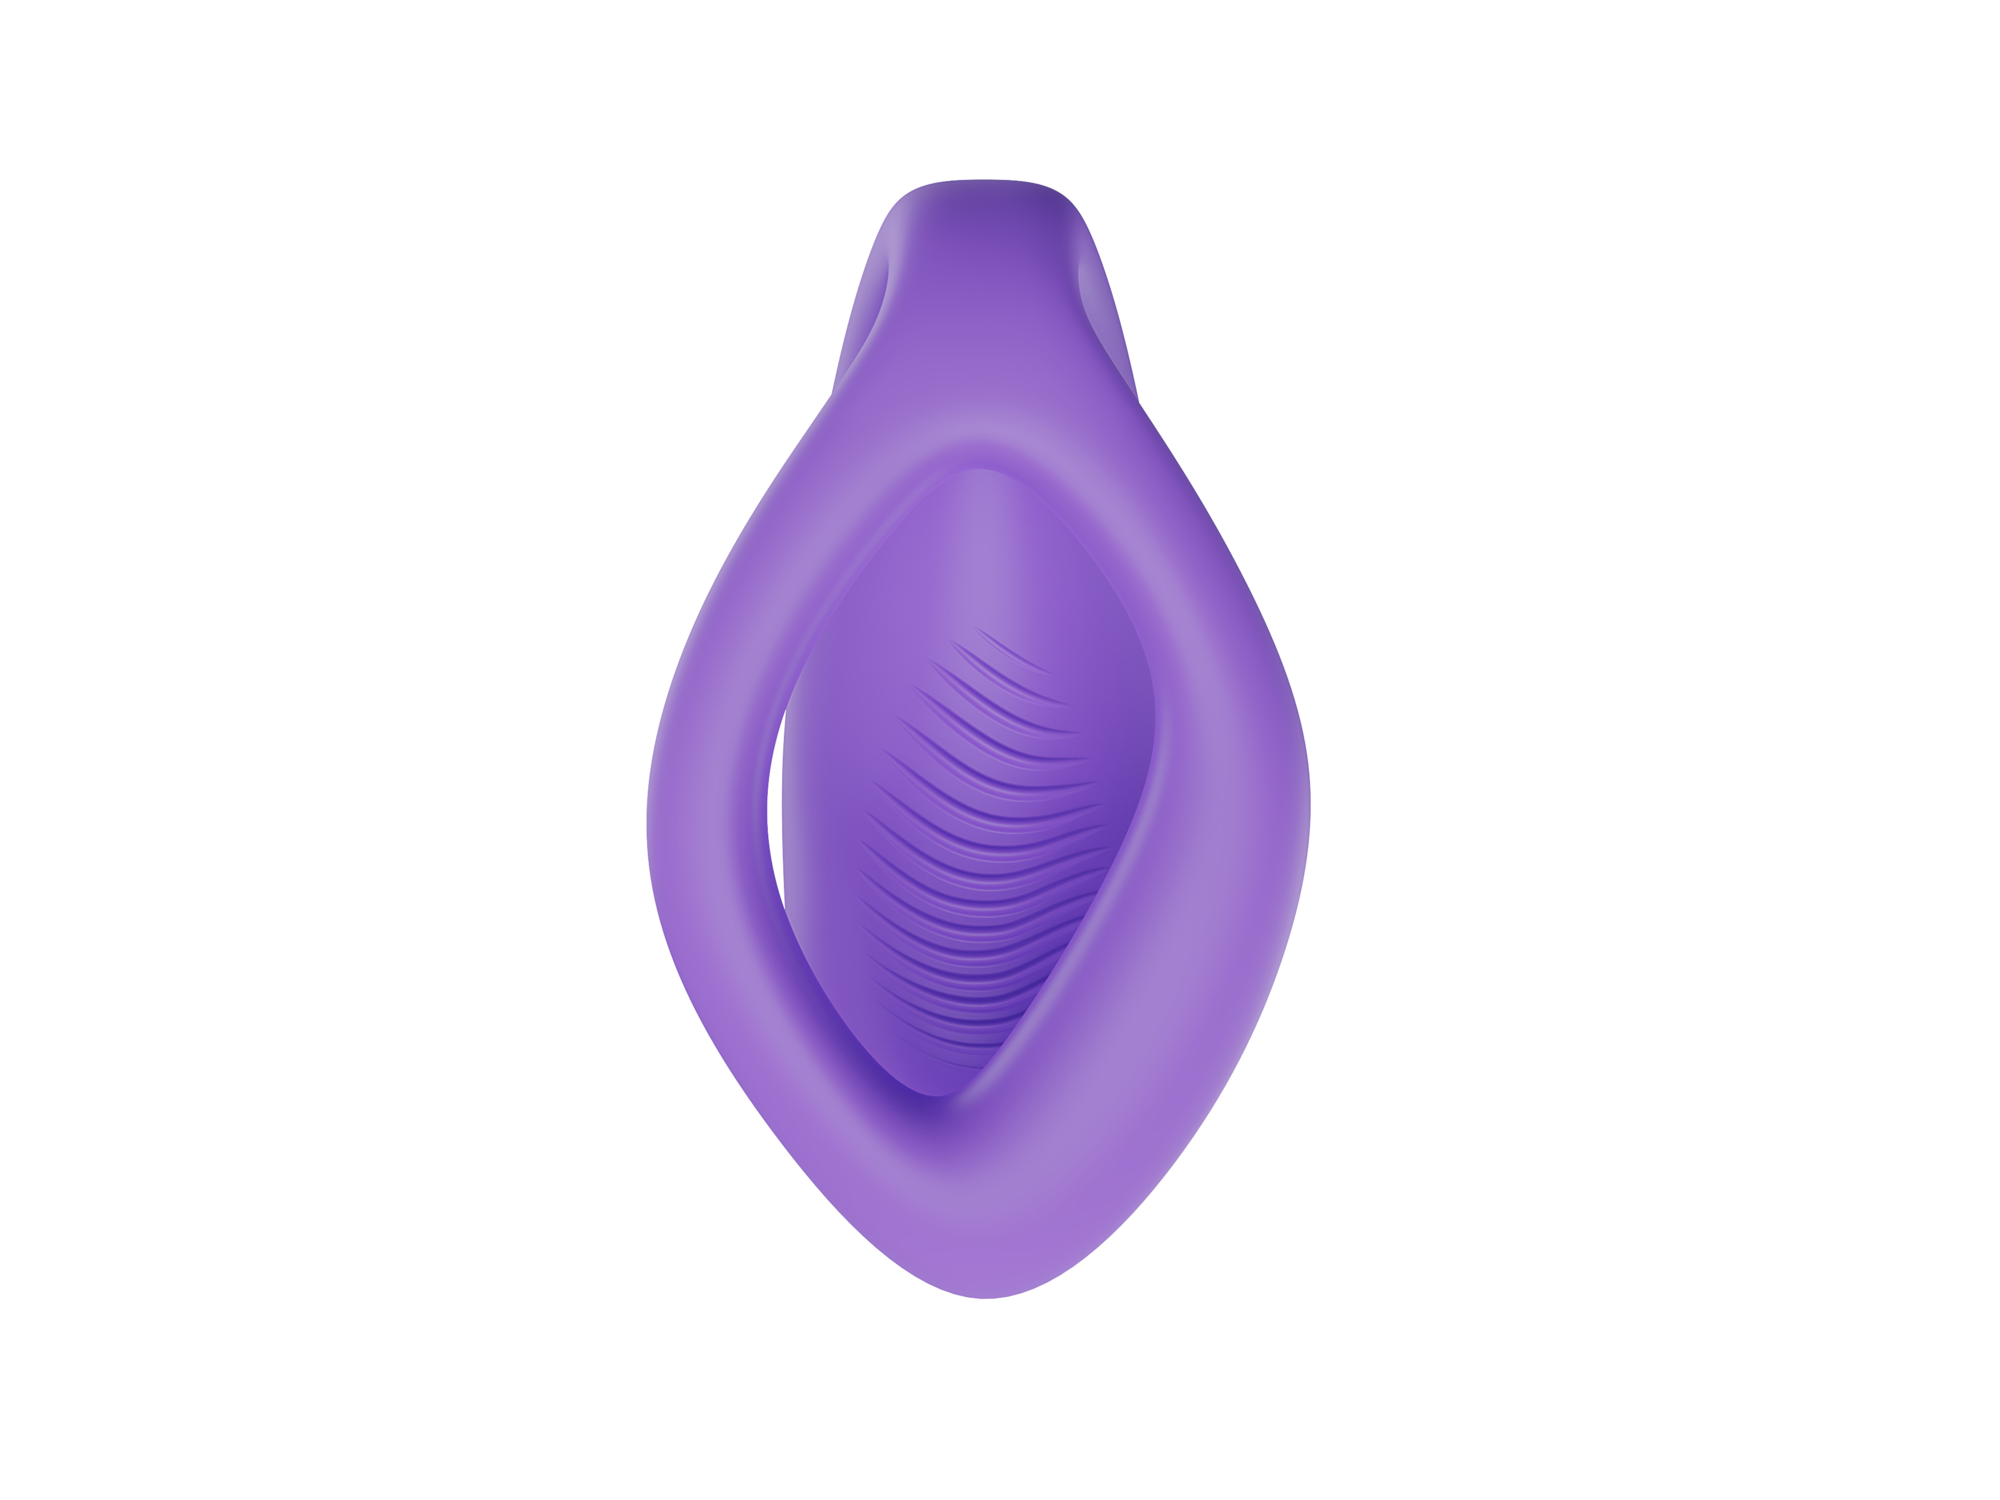 We-Vibe Sync O USB Rechargeable Couple's Vibrator with We-Connect App